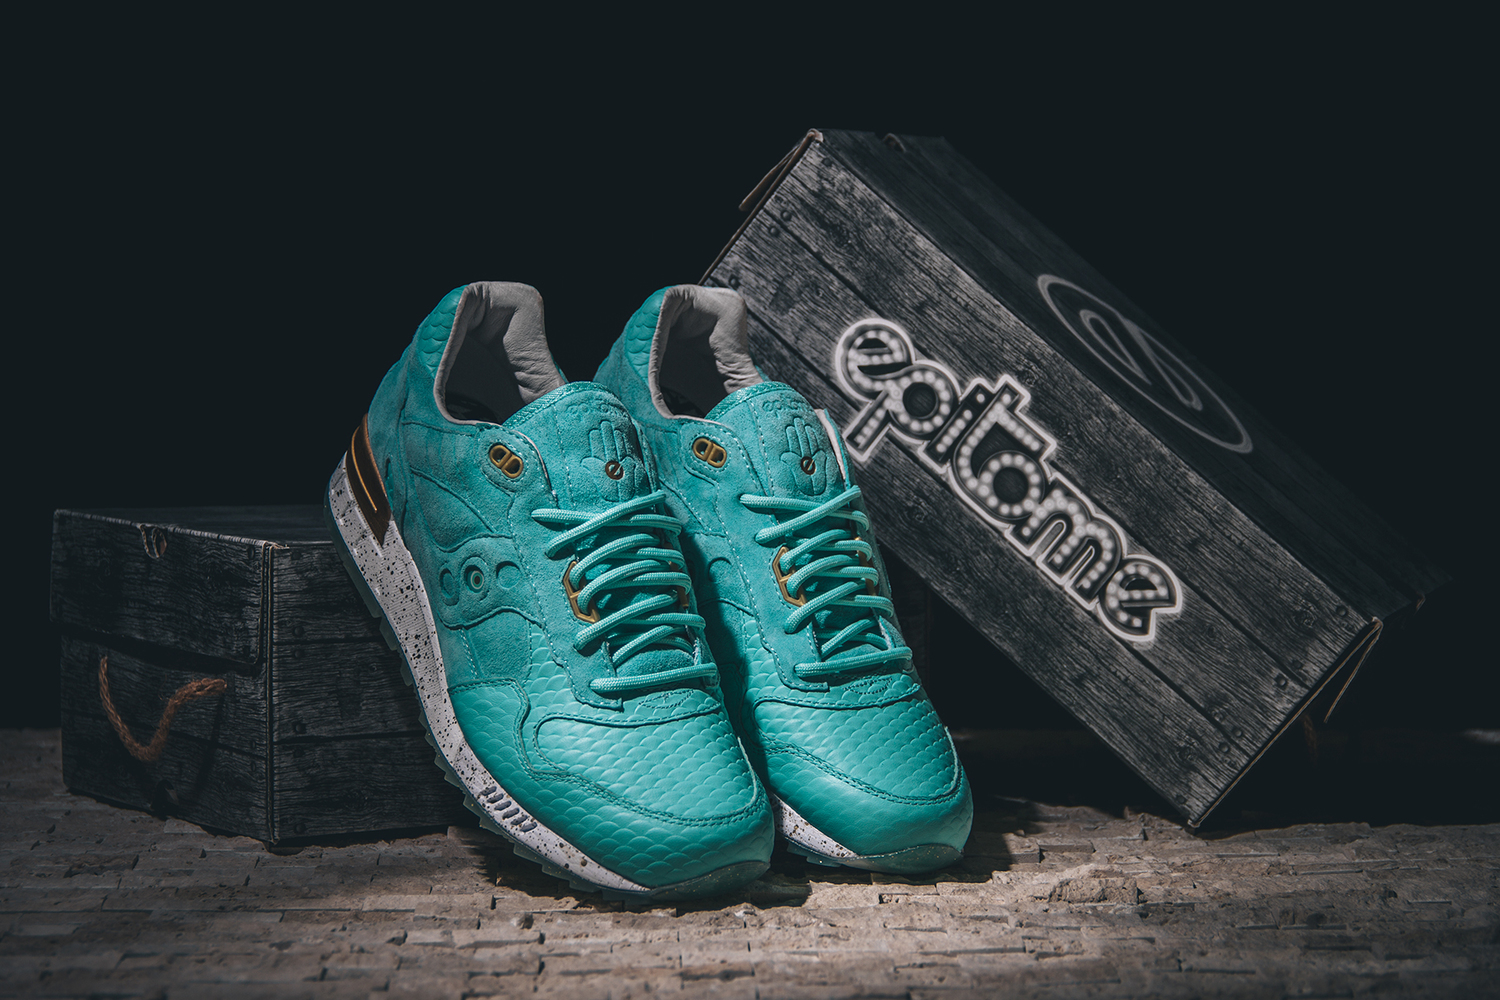 x Saucony Shadow 5000 “Righteous One 